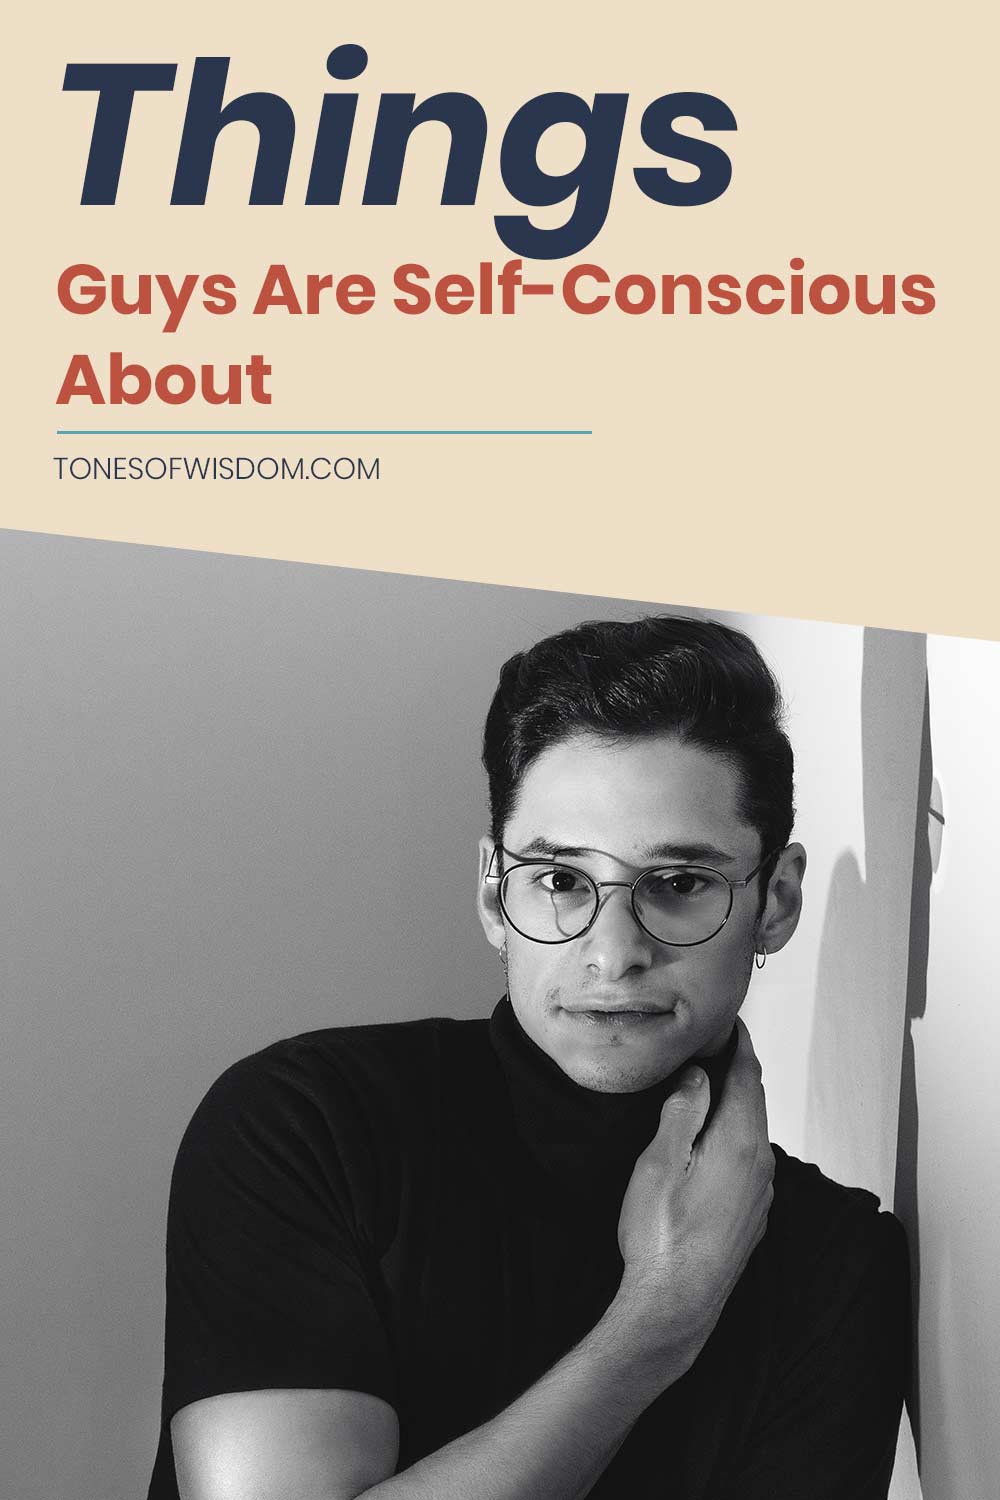 Things Guys Are Self-Conscious About